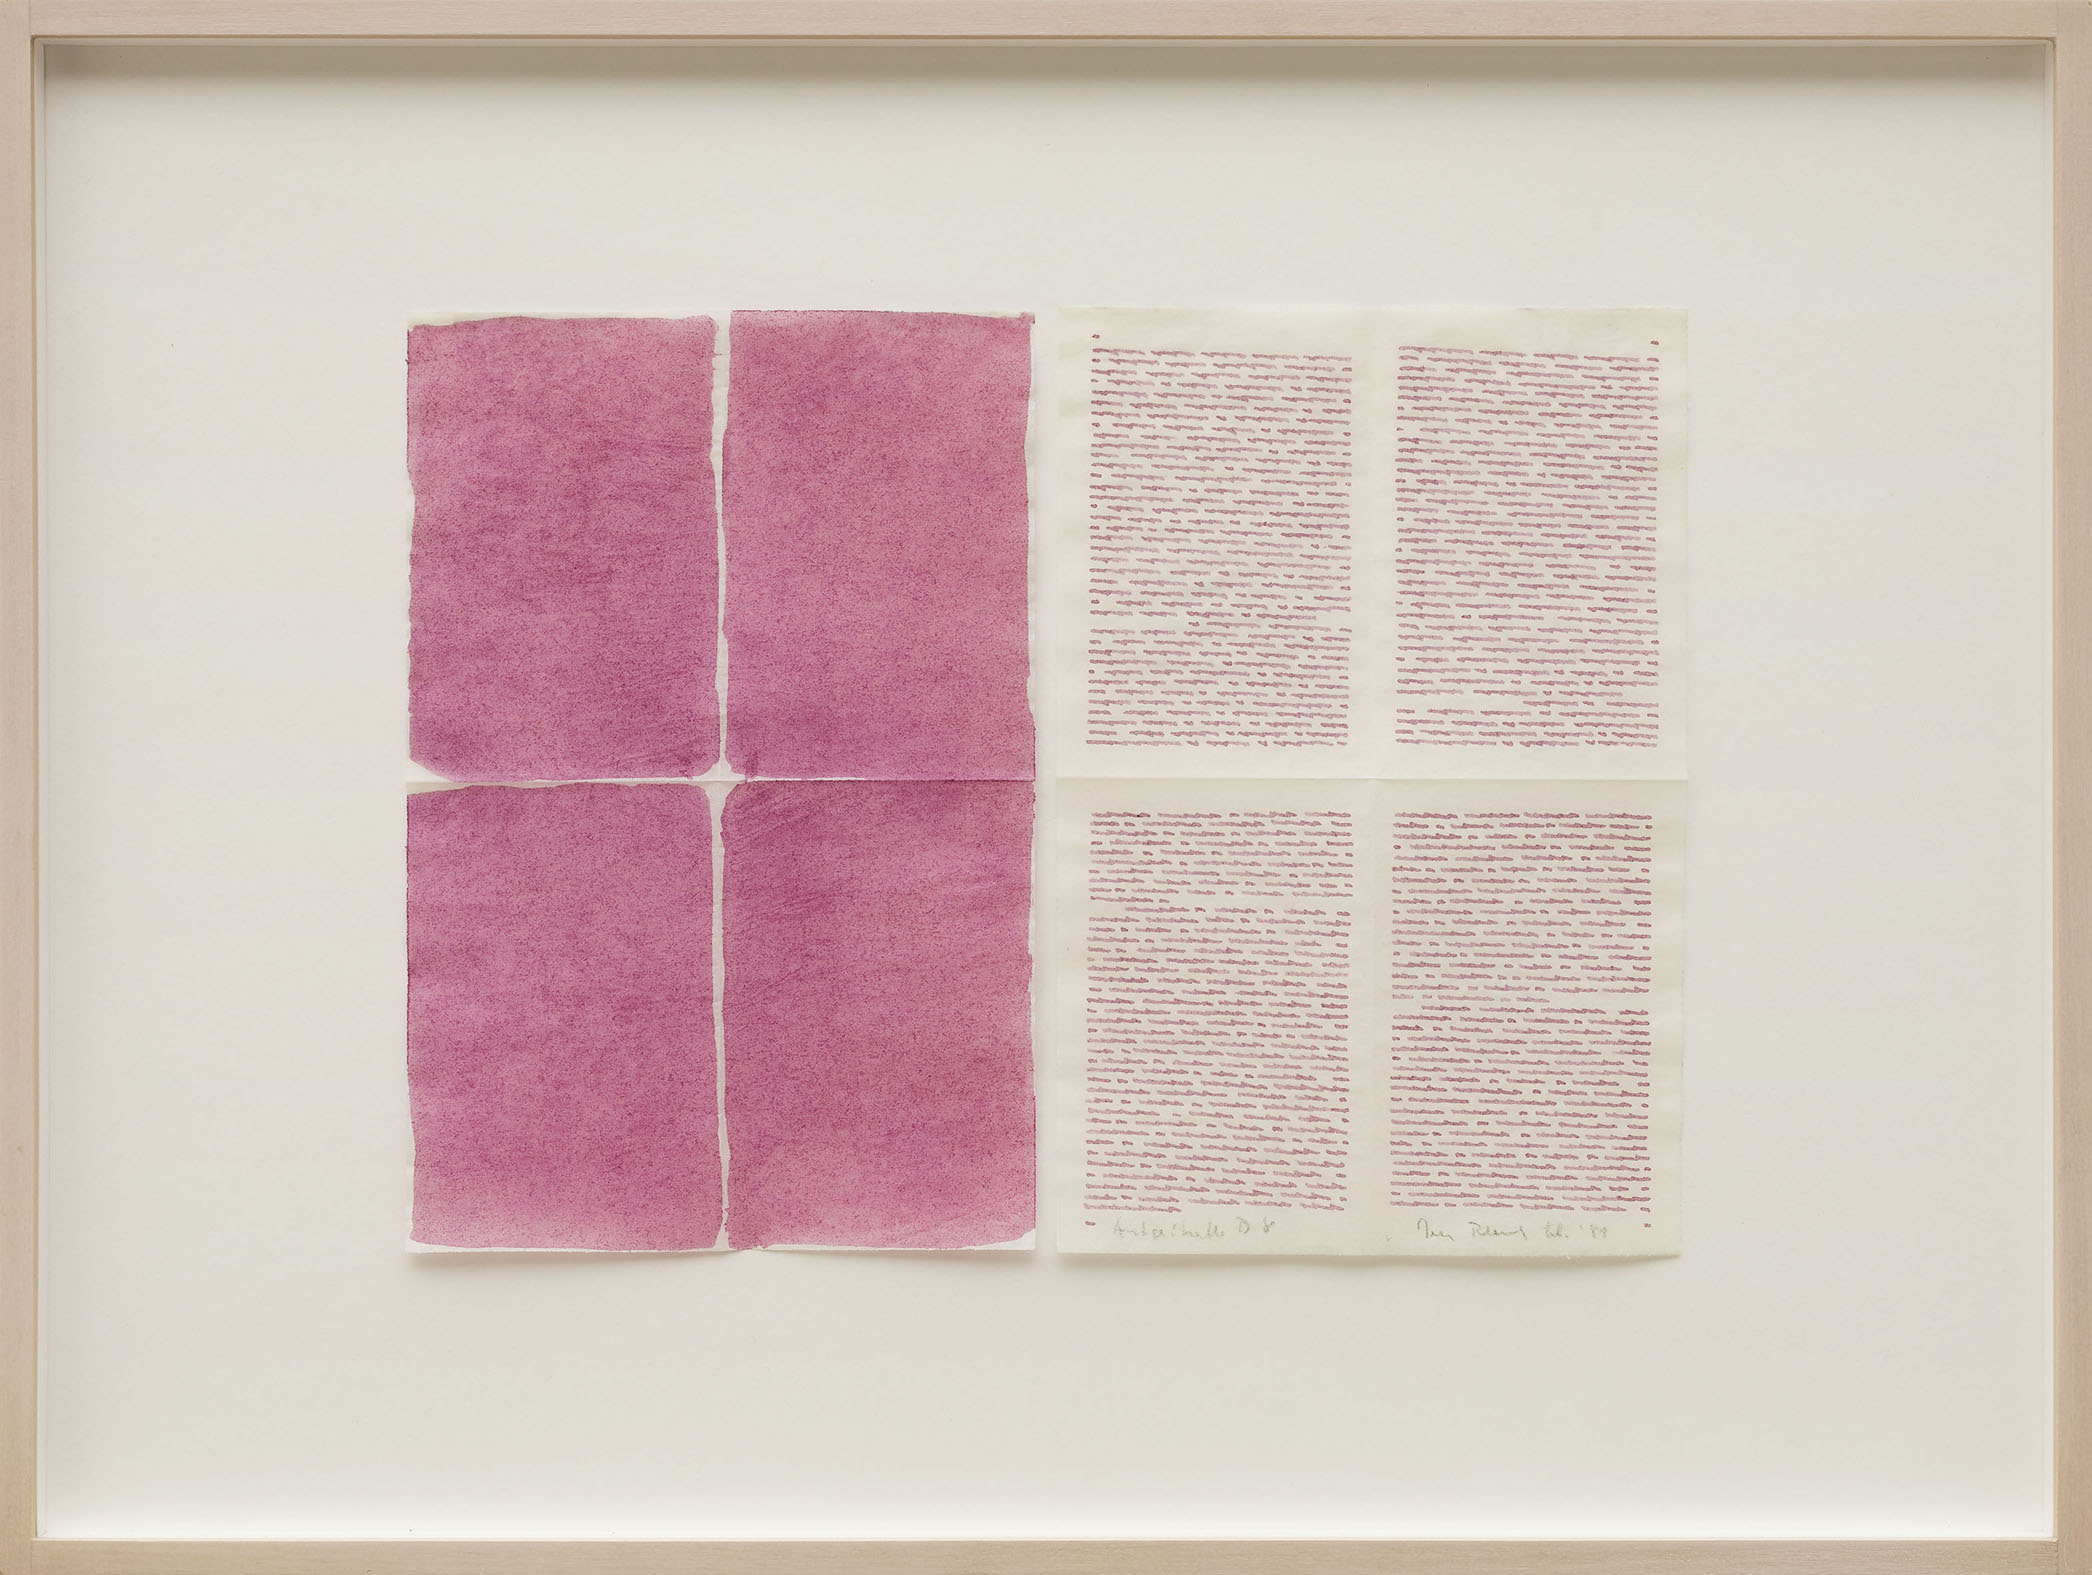 Autoritratto D8, pastel and ink on parchment like paper, diptych, 21 x 14 each (21 x 28 cm overall), 1981